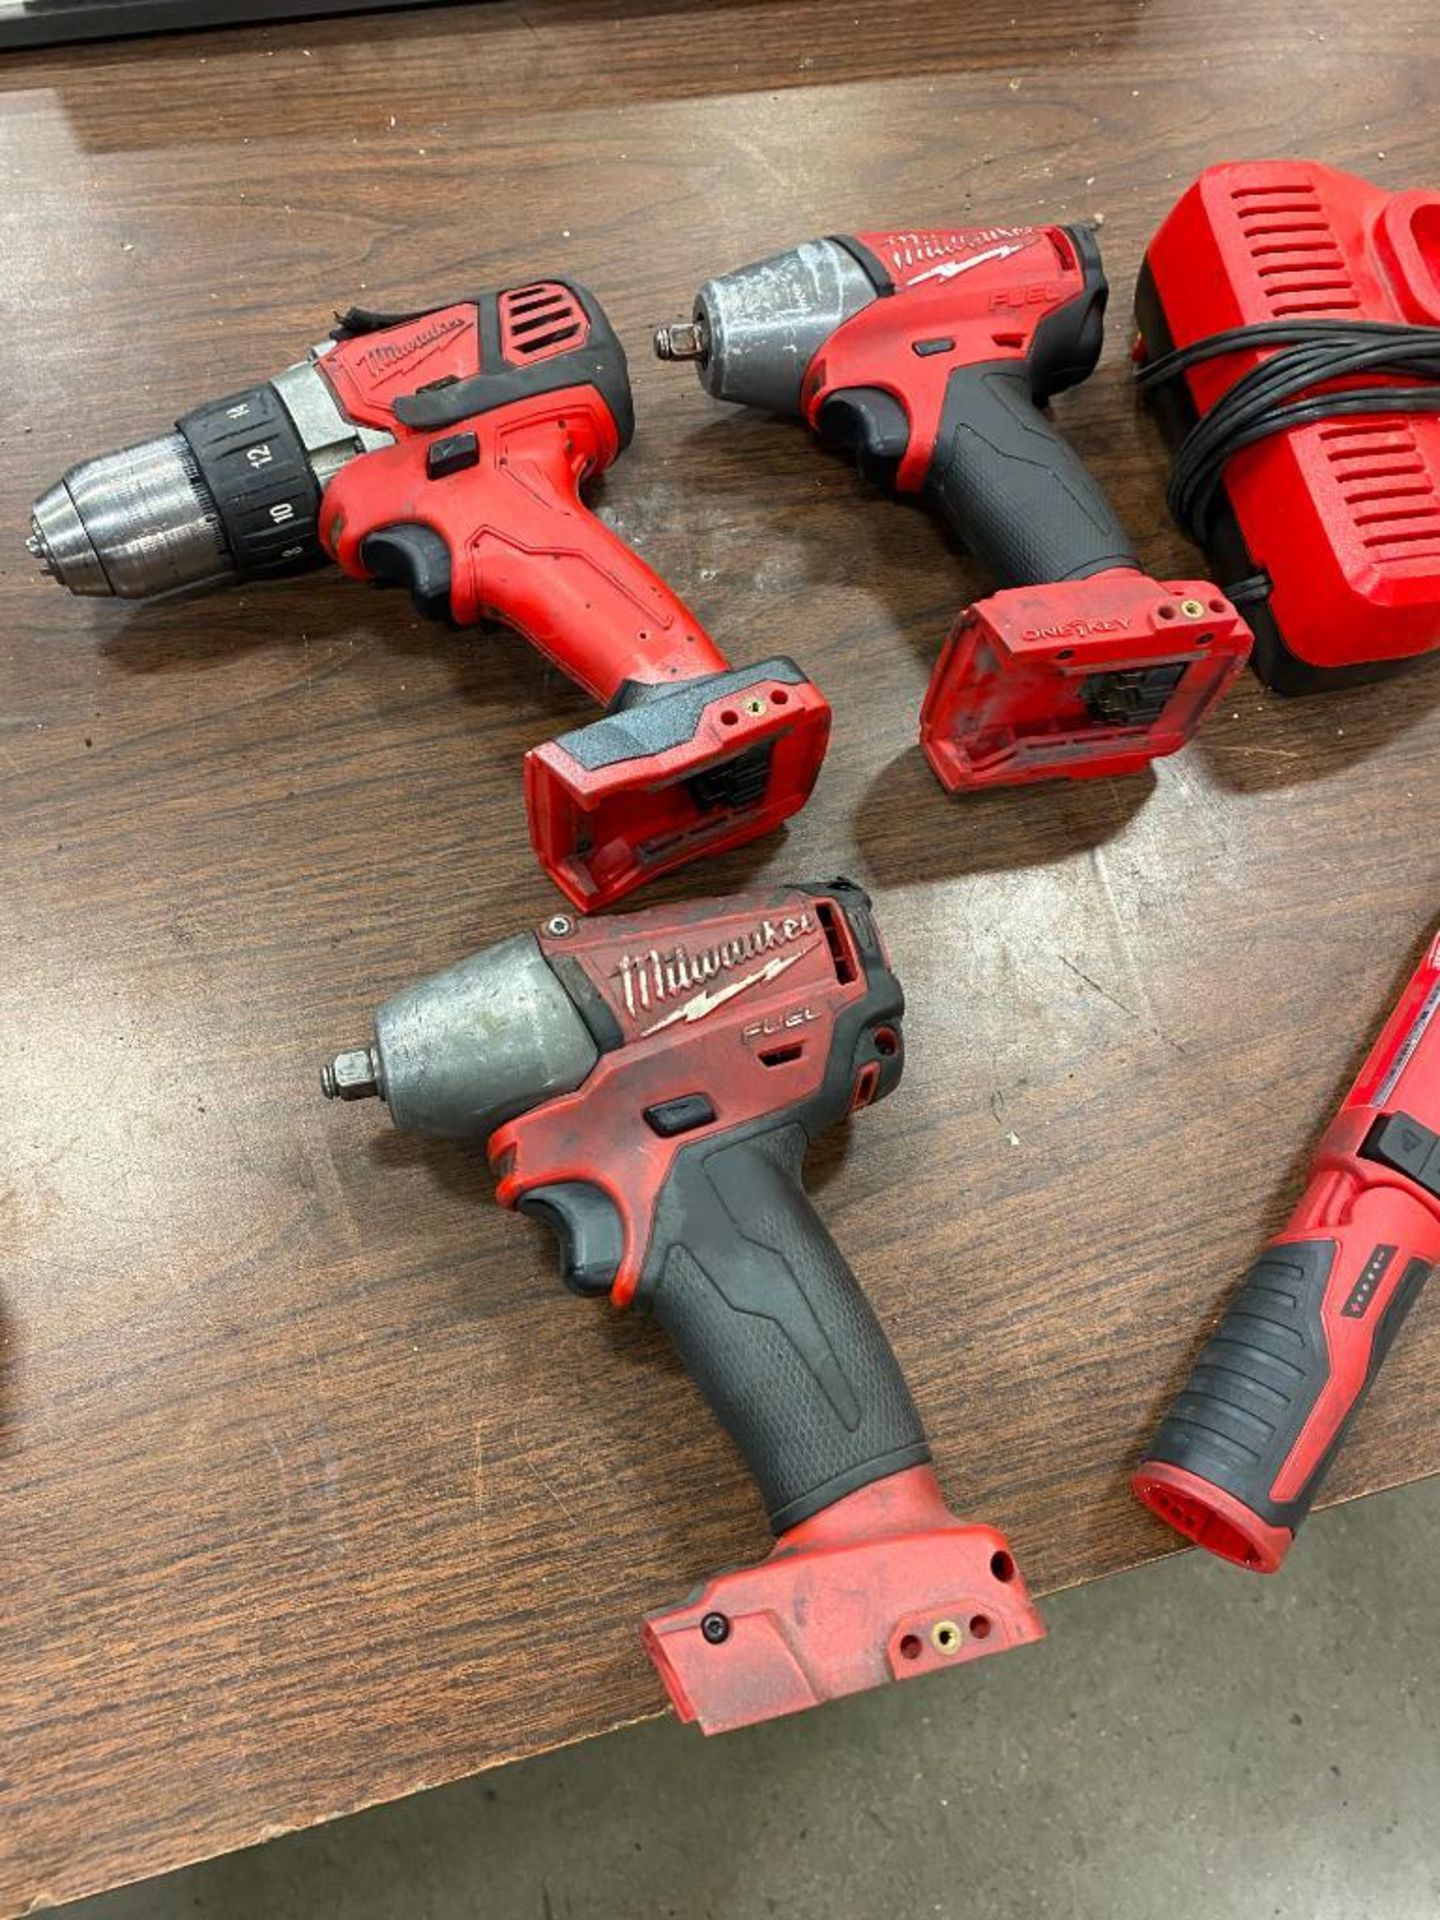 (3) CORDLESS MILWAUKEE DRILLS, (2) MILWAUKEE IMPACTS, (1) CORDLESS SCREWDRIVER, (1) M12 BATTERY CHAR - Image 3 of 3